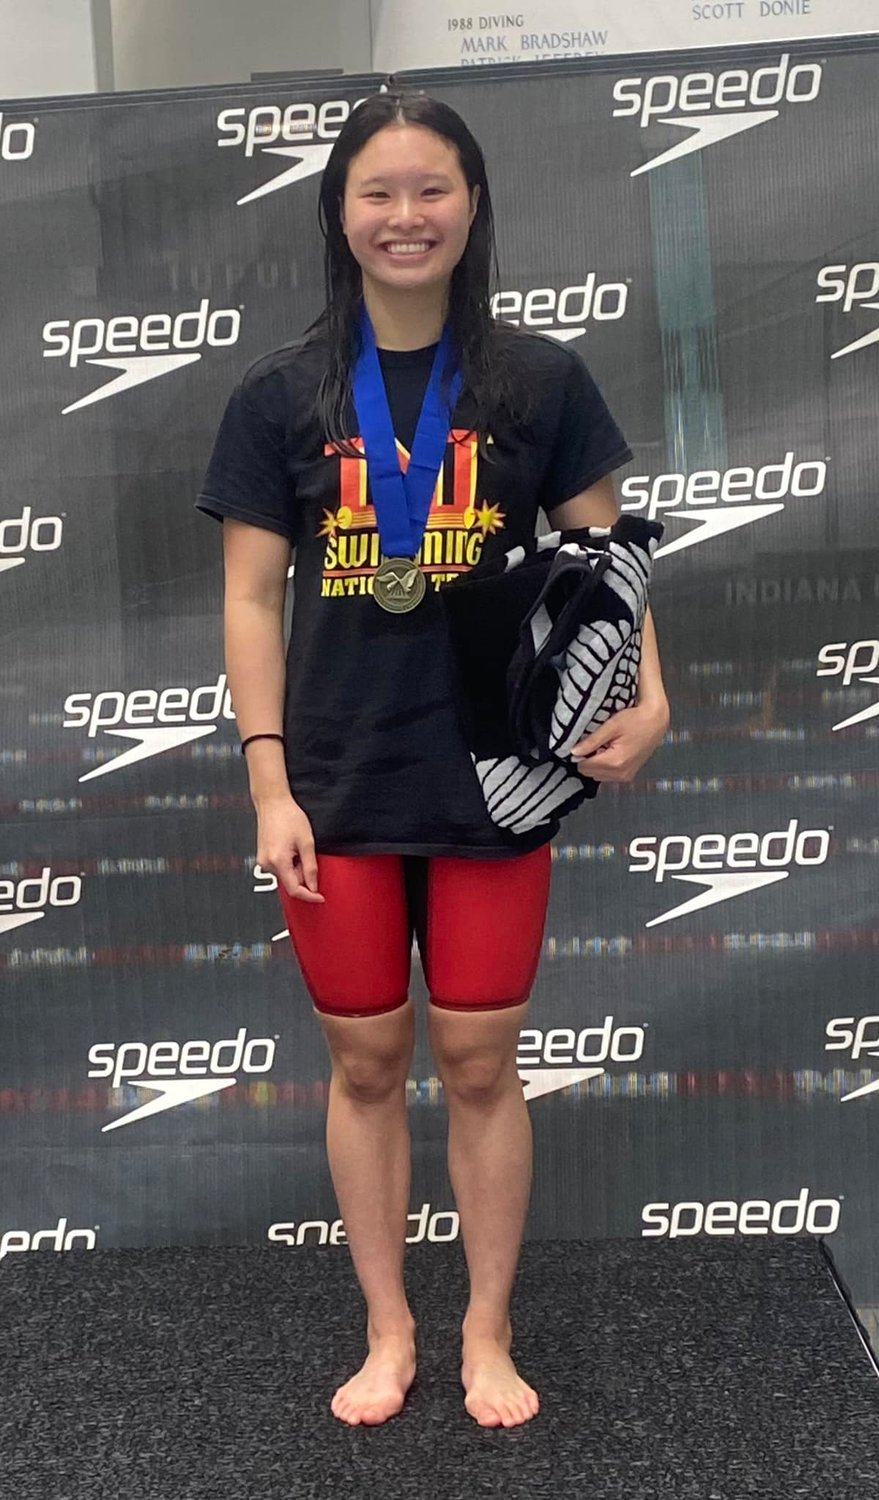 Spanish Fort junior and TNT Swimming’s Levenia Sim poses with one of her three gold medals from the NCSA Summer Junior National Championships. Sim was recently named to her second USA Swimming National Junior Team.